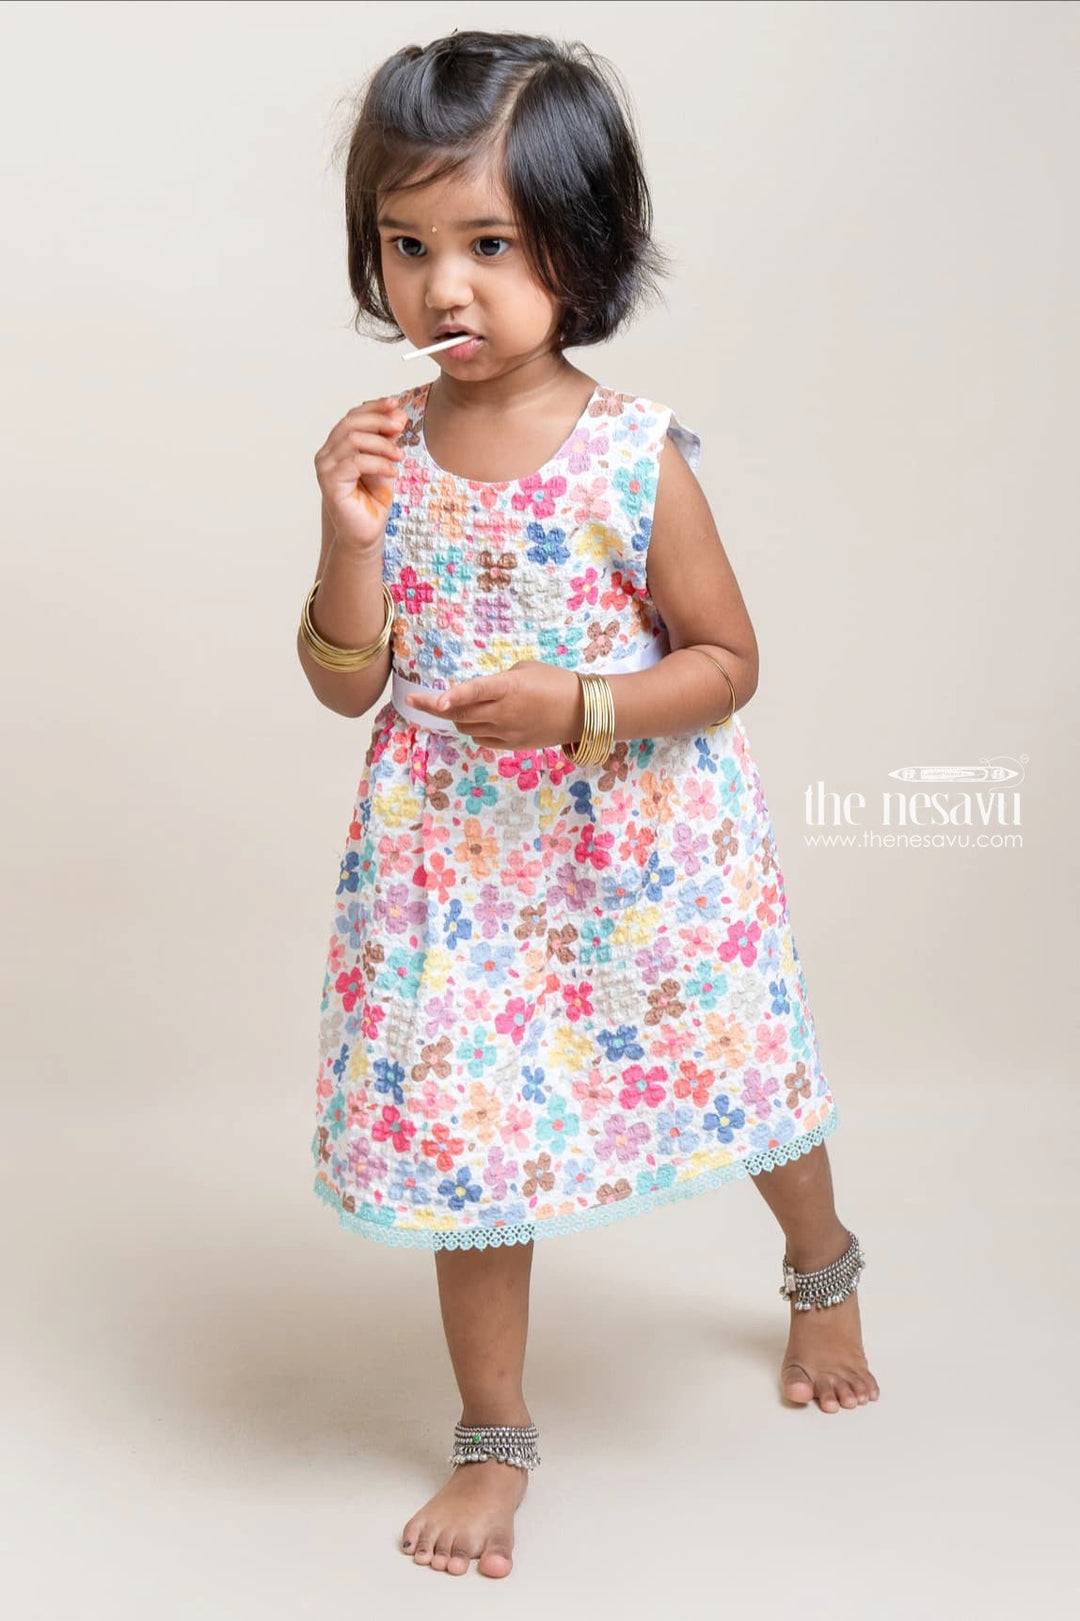 The Nesavu Baby Fancy Frock Adorable Multi-colored Floral Printed Sleeveless Frock For Baby Girls Nesavu 14 (6M) / multicolor / Cotton Blend BFJ358A-14 Comfortable cotton frocks for babies | Flower Designed Frocks | The Nesavu